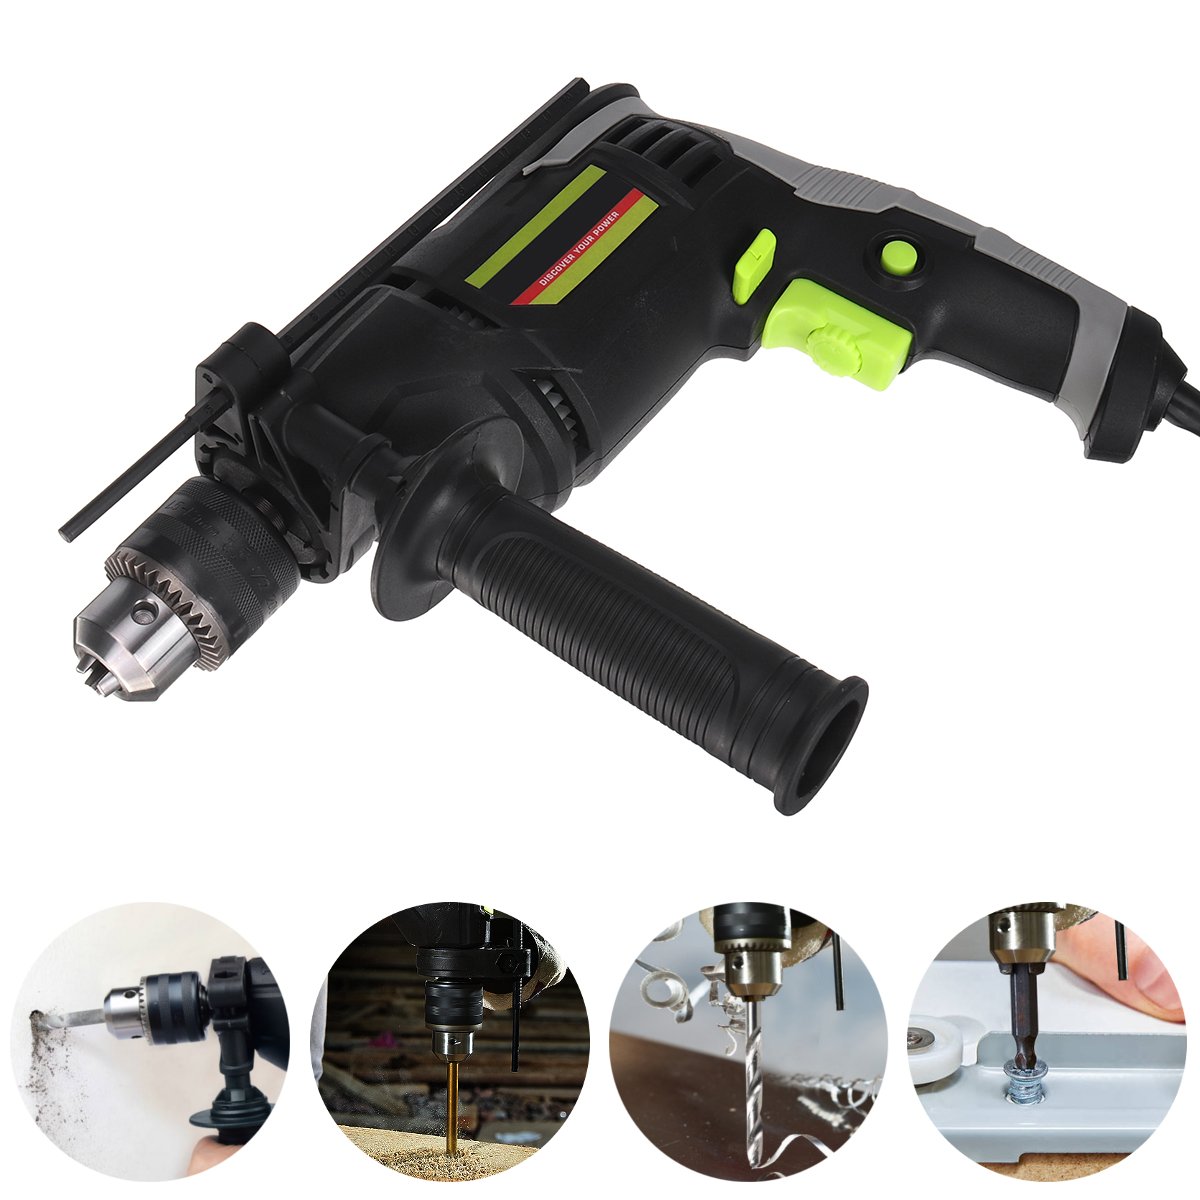 220V-710W-Electric-Impact-Drill-Rotary-Hammer-Concrete-Punch-Chisel-Driver-Hand-Tools-1736353-3